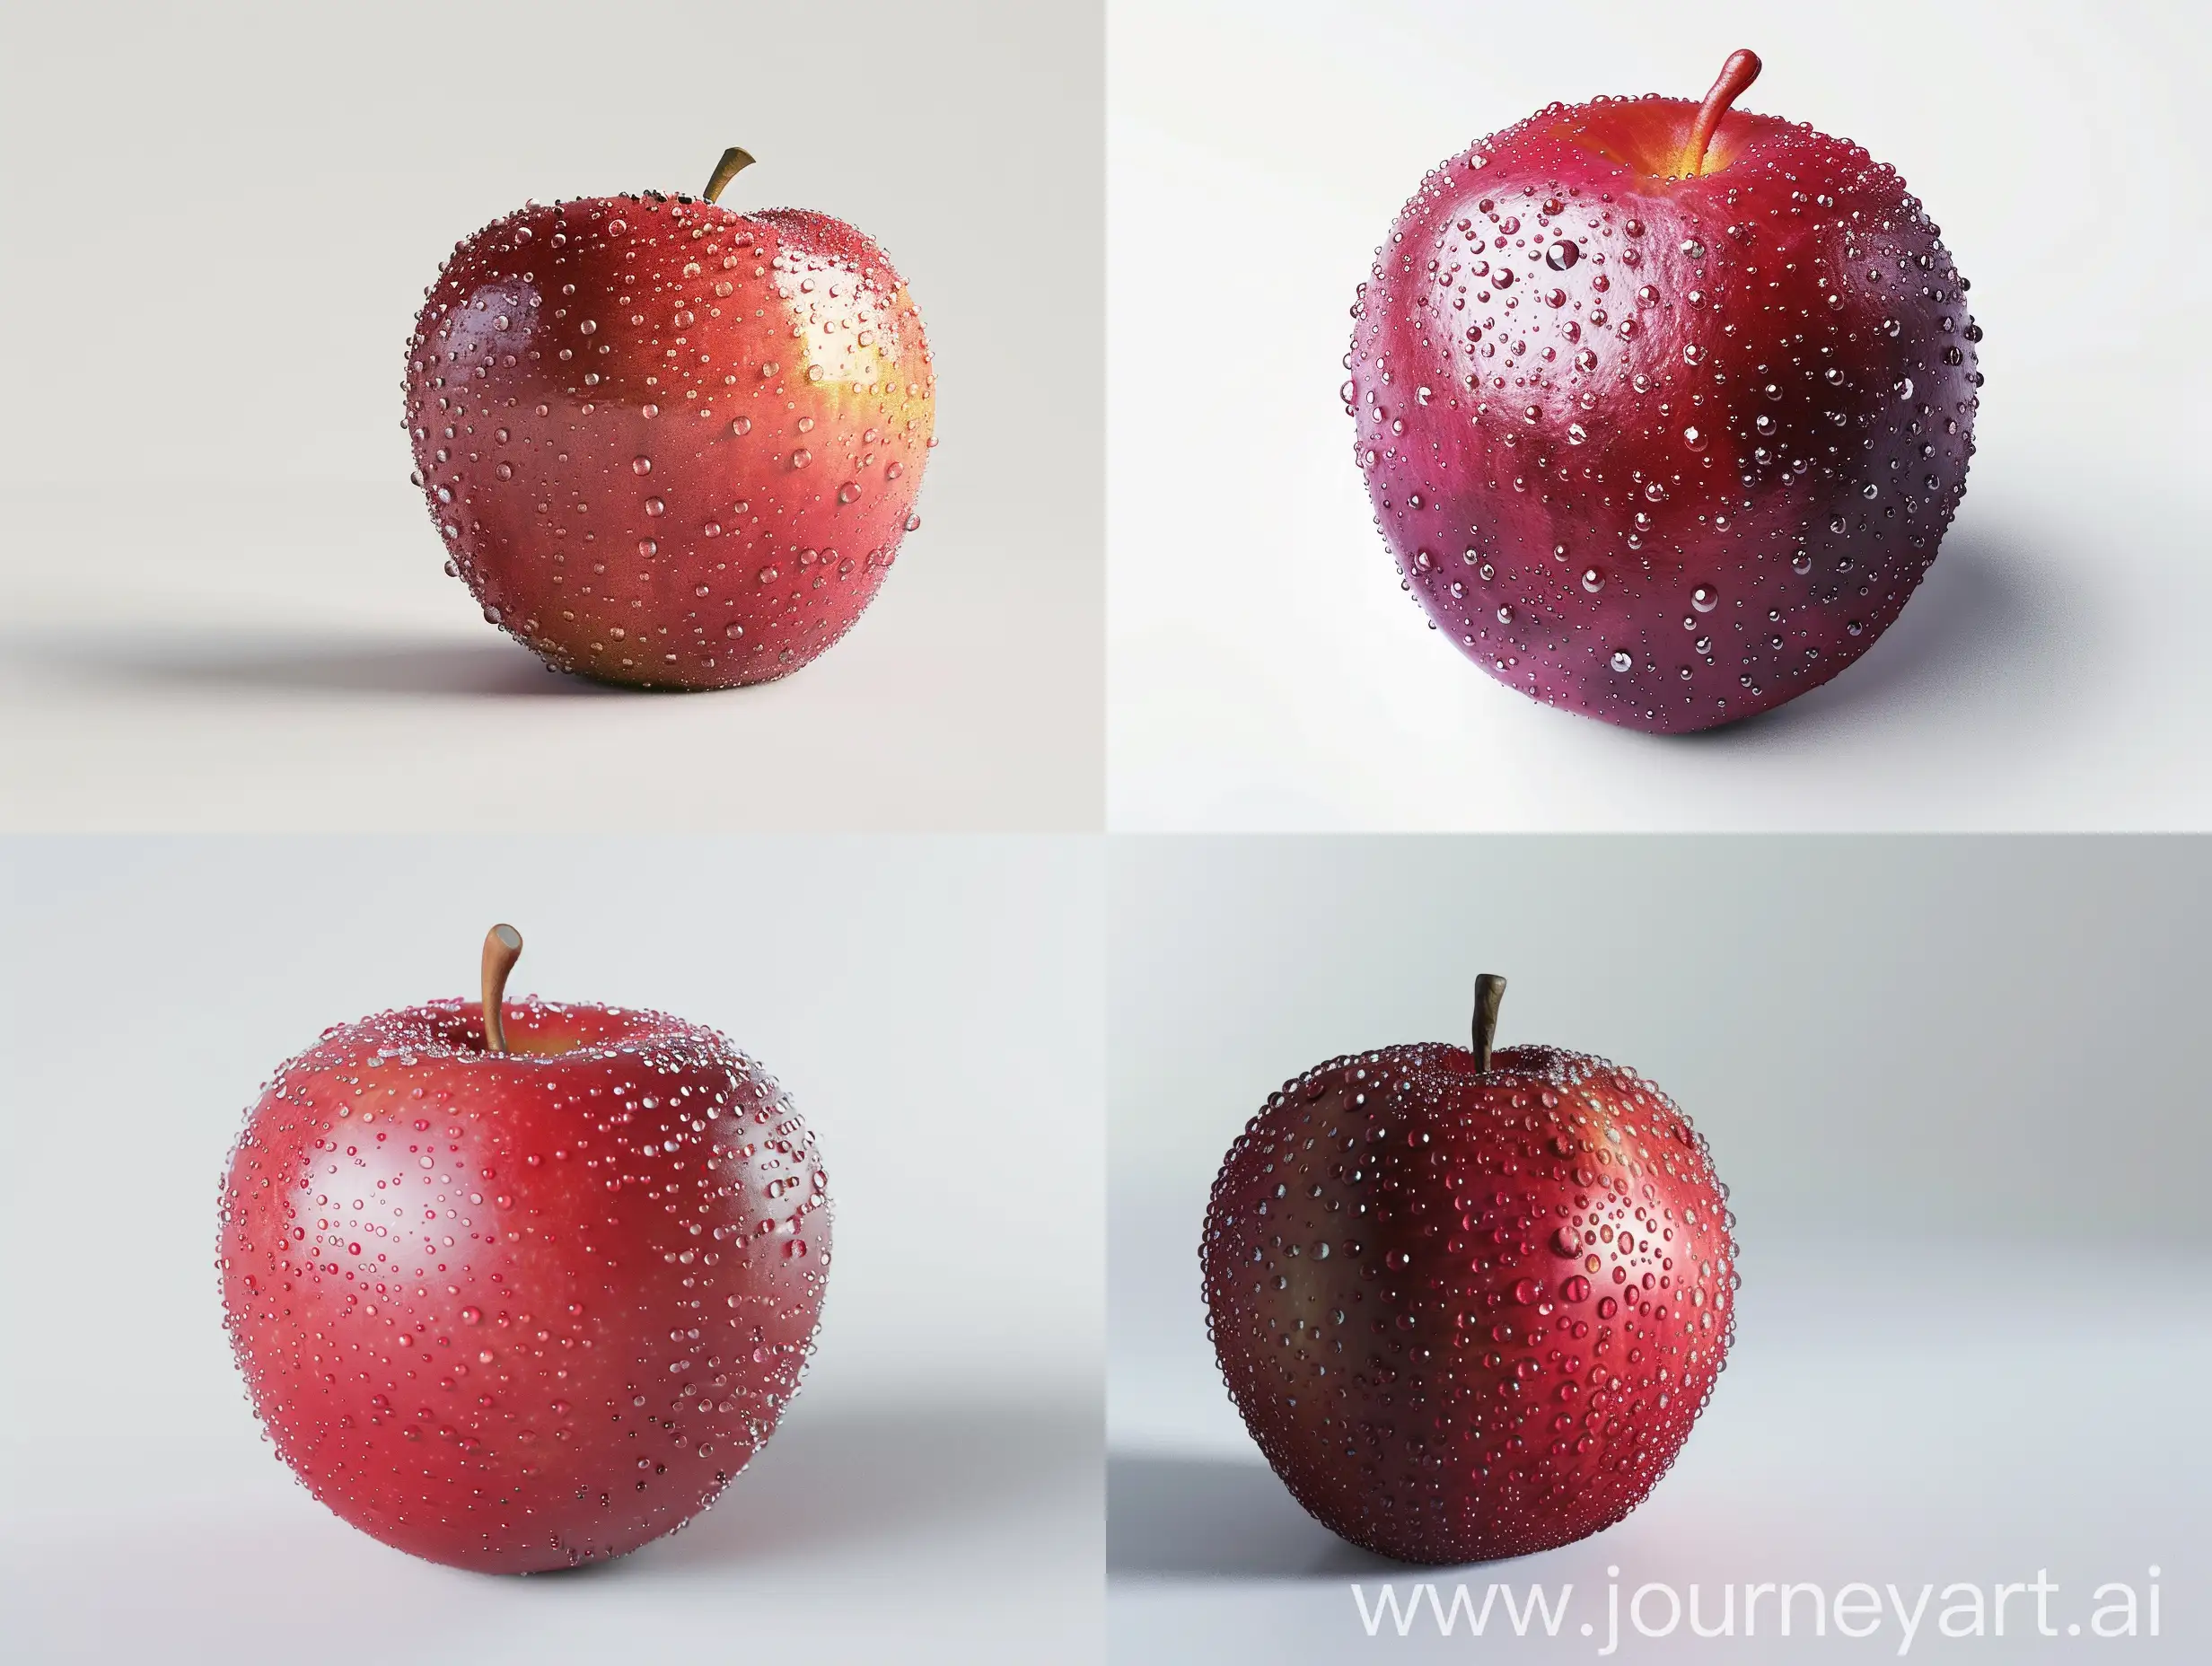 Realistic-3D-Rendered-Red-Apple-with-Glistening-Water-Droplets-on-Pure-White-Background